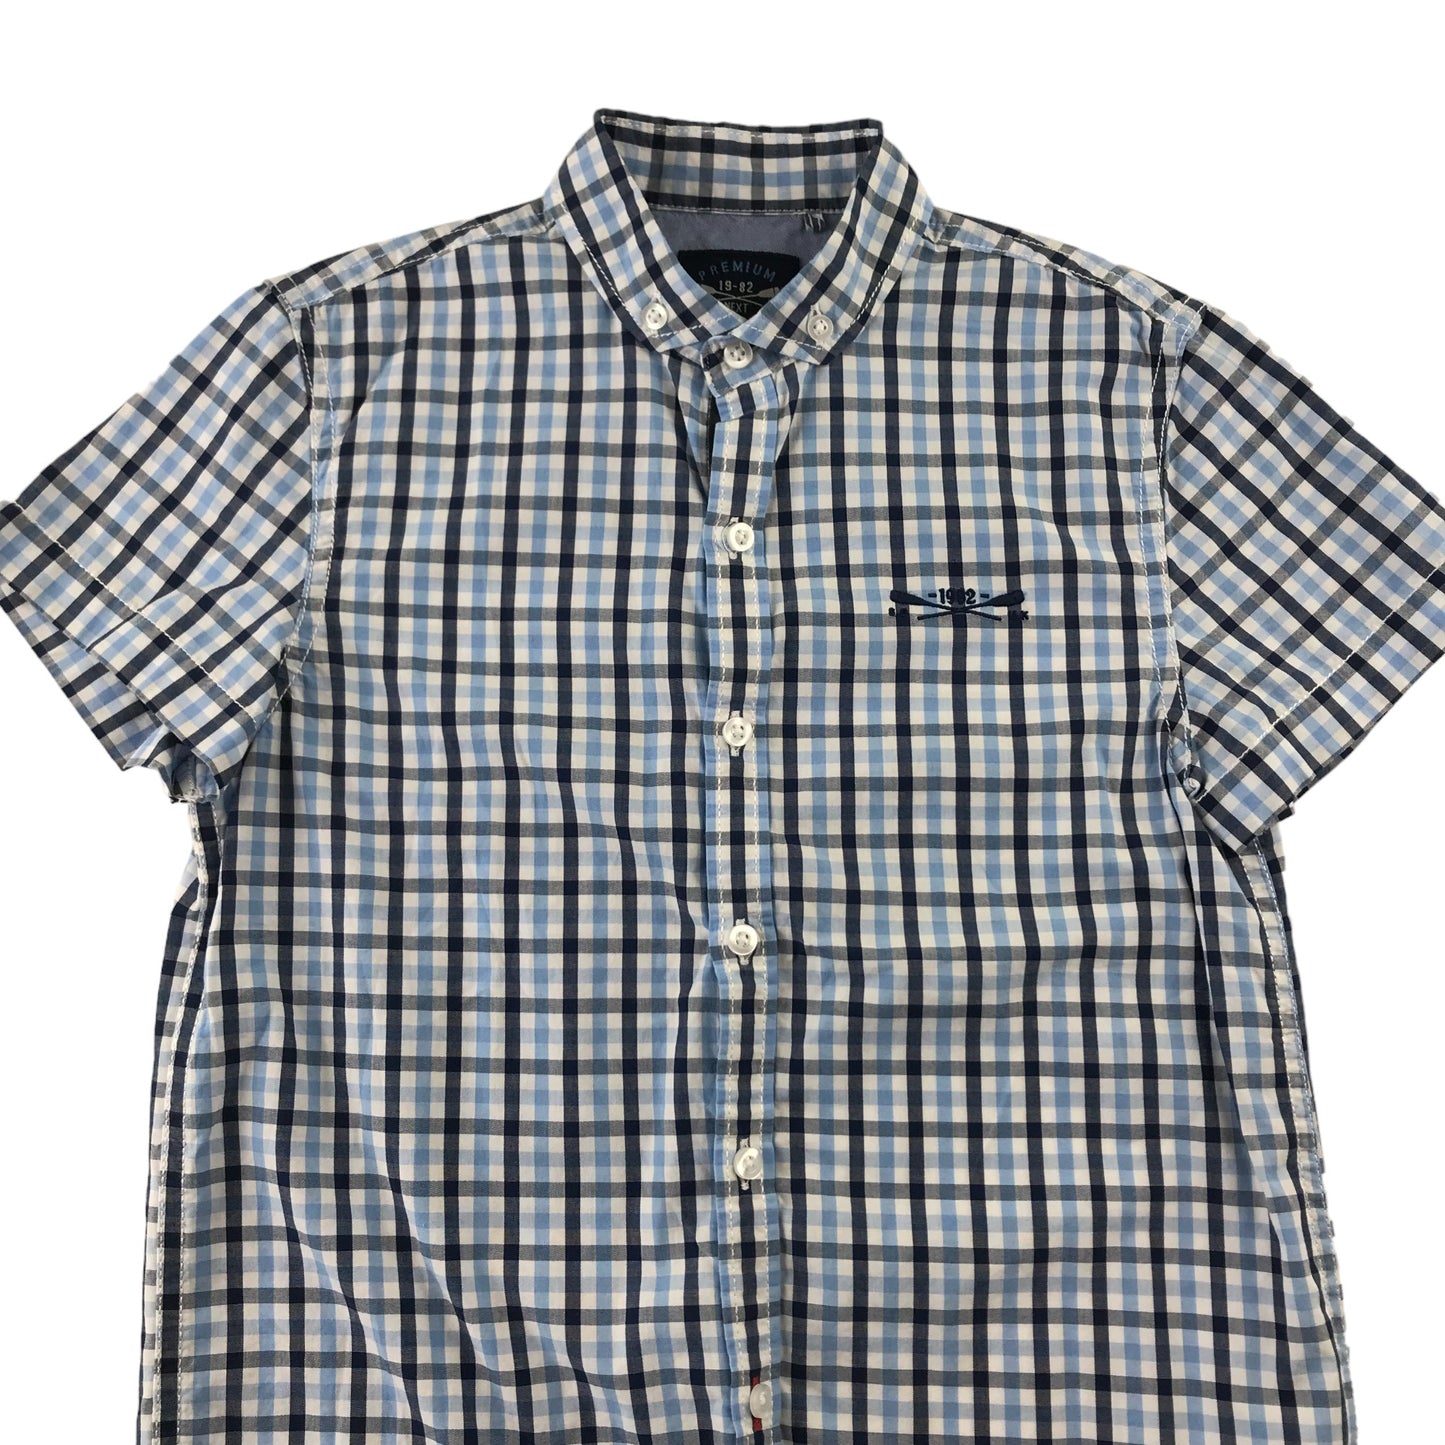 Next Shirt Age 9 Blue and Navy Checked Pattern Short Sleeve Button Up Cotton